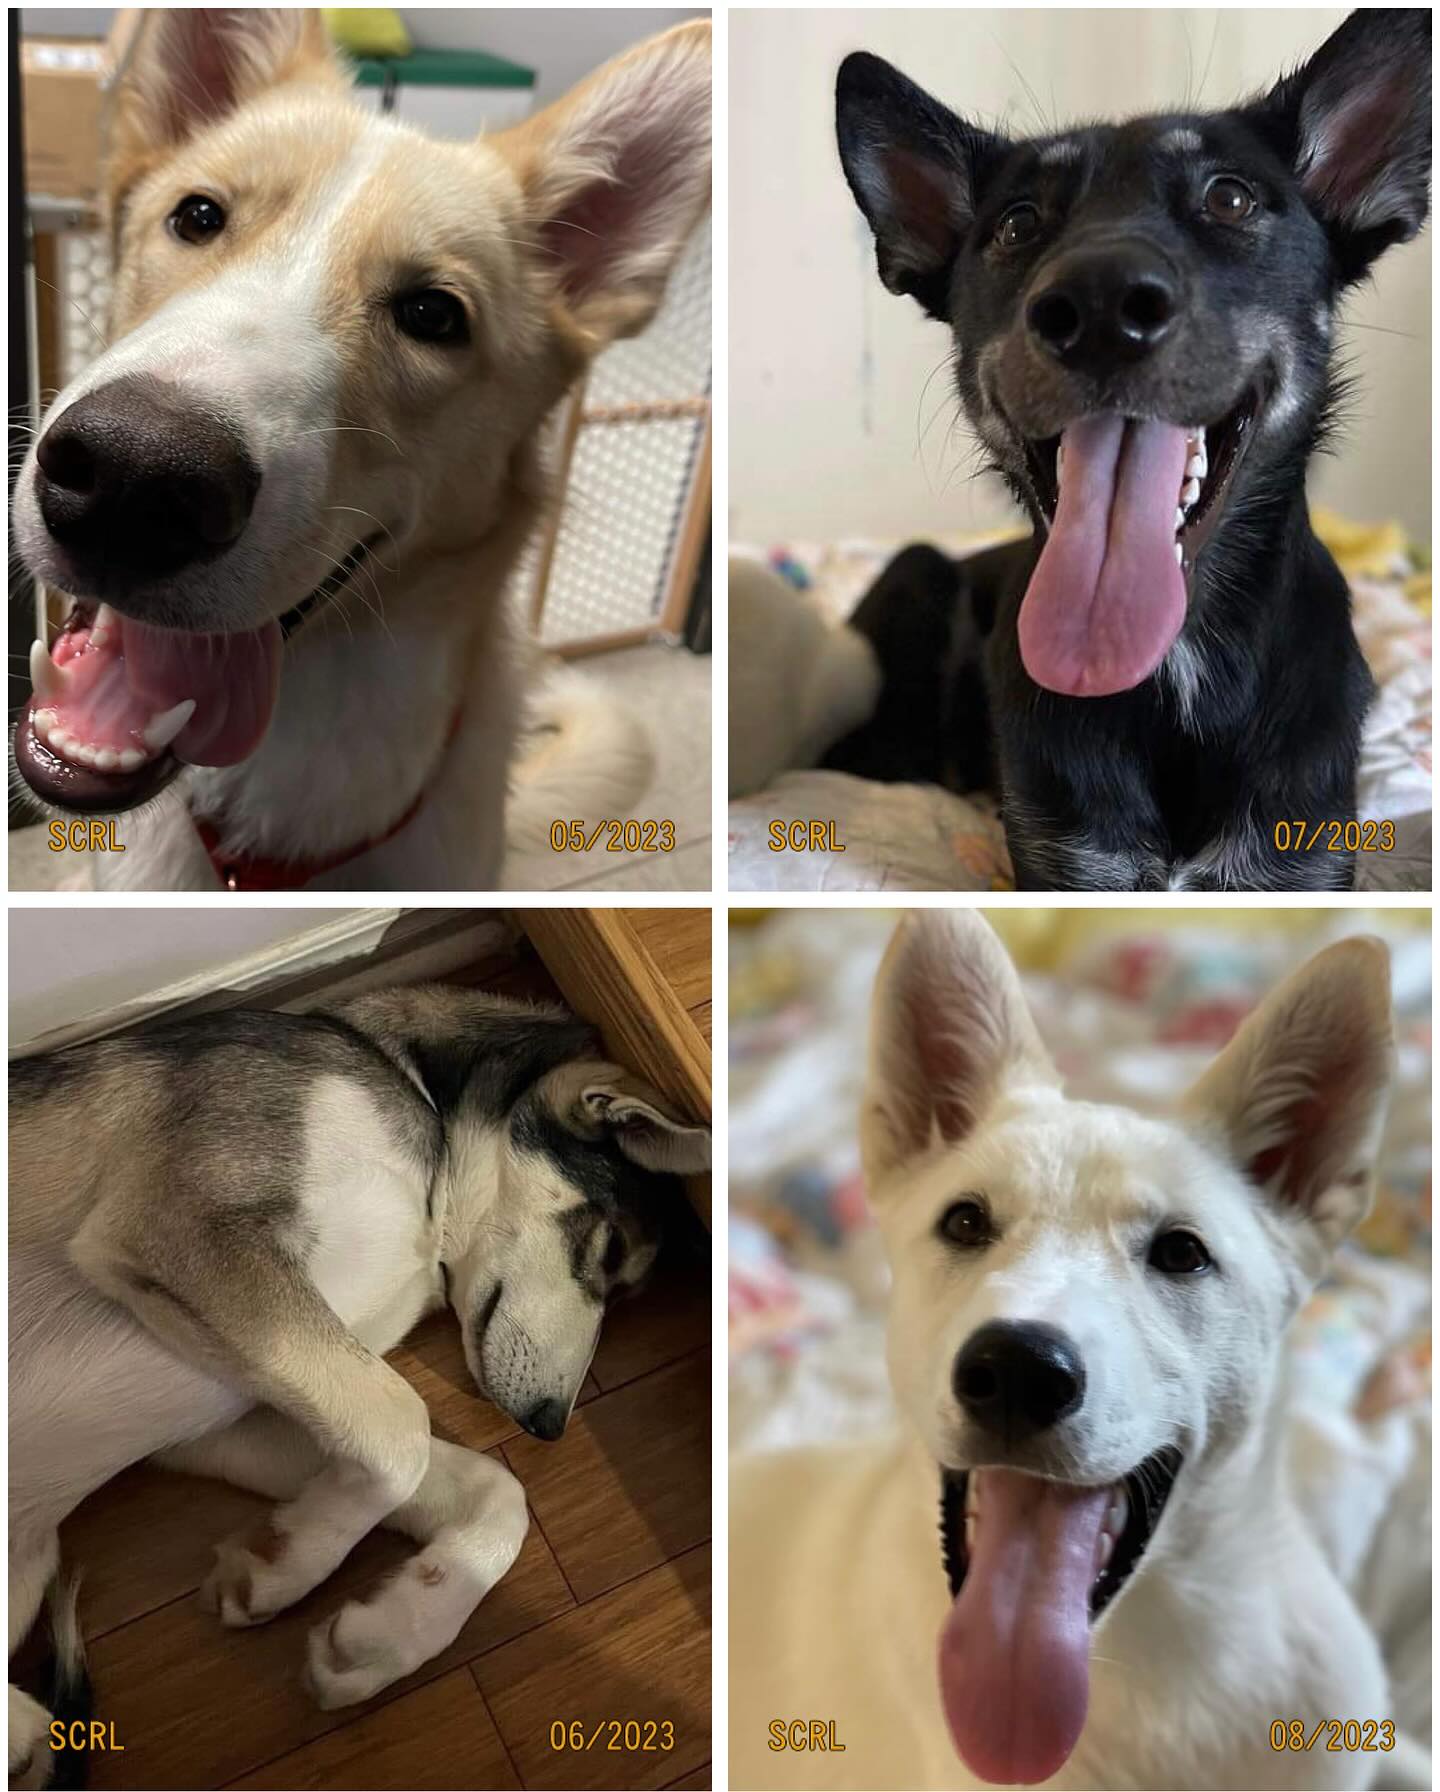 A few of the dogs I’ve rescued from the dog sledding industry🐾 Look at their beautiful faces 🥹💜 I love them!